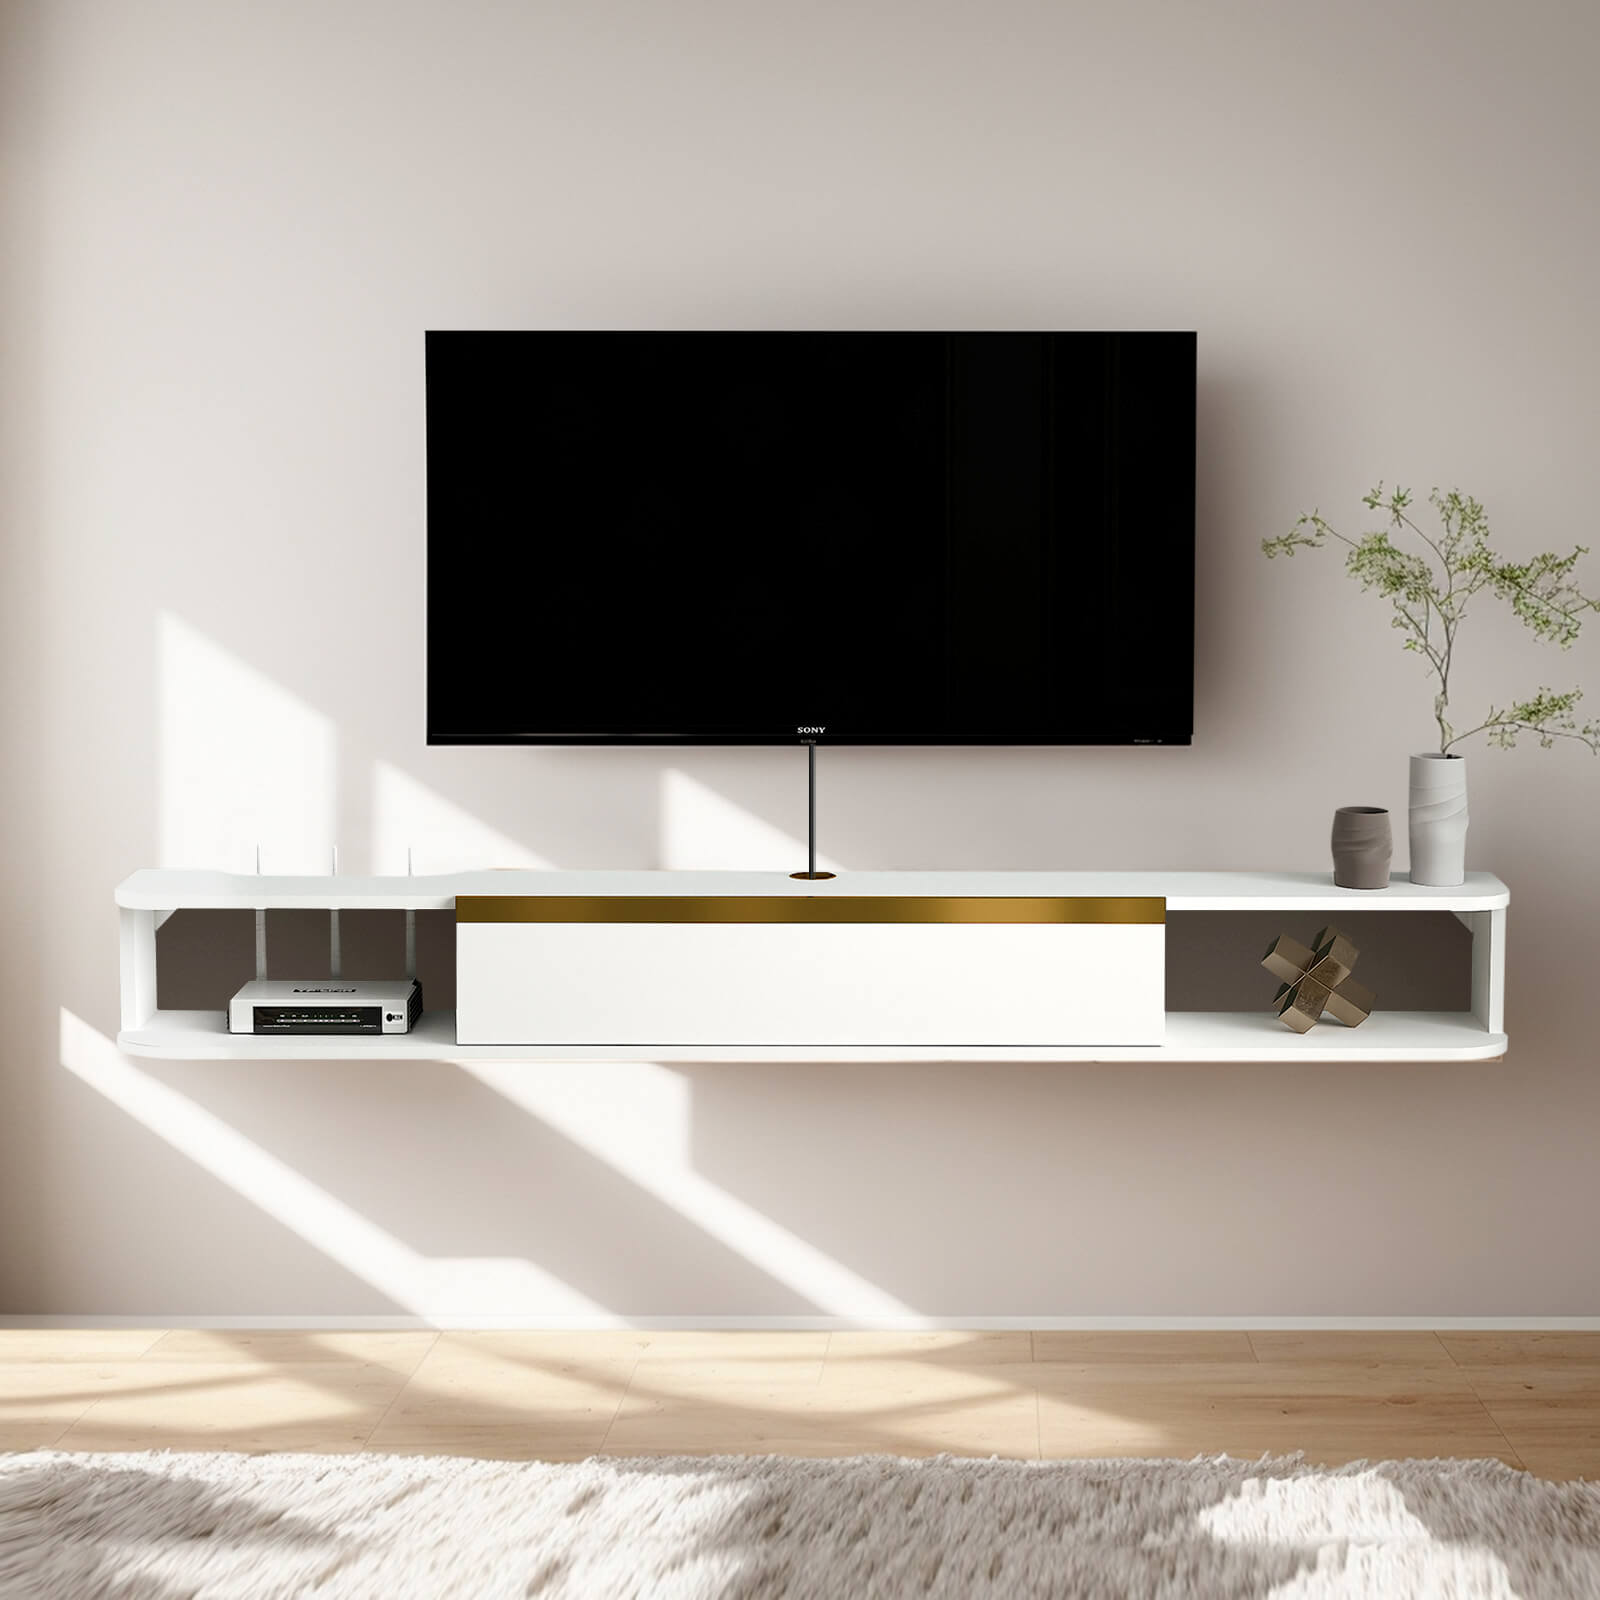 62.99"Plywood Floating TV Stand Wall Shelf for 65" 70" TV, White with Golden Accent